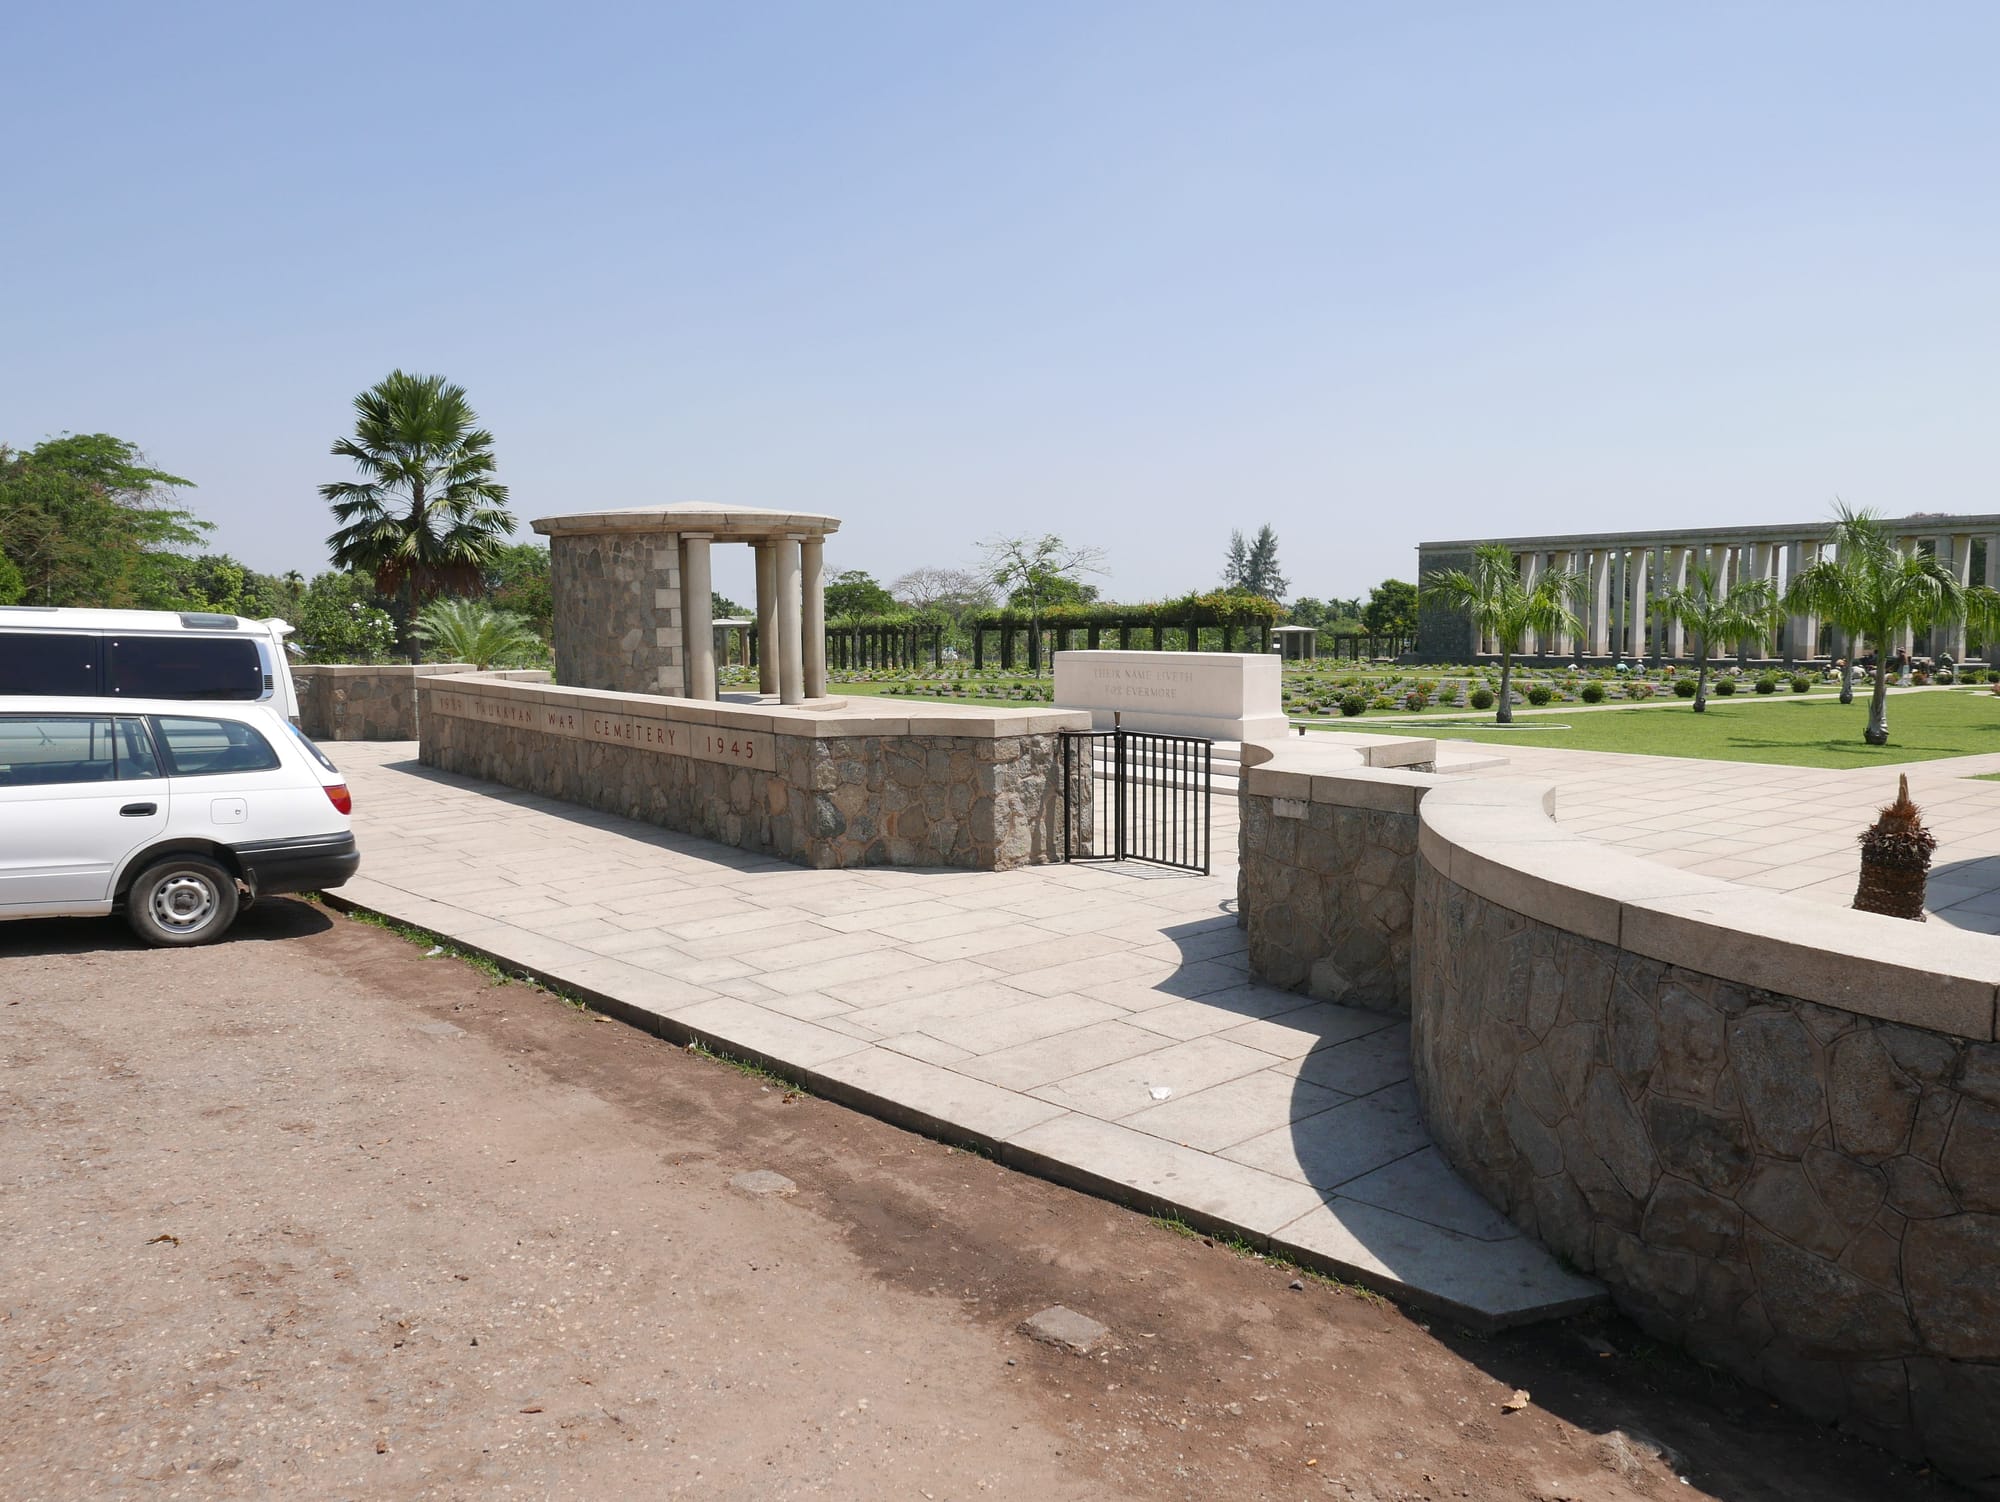 Photo by Author — The Taukkyan War Cemetery, which I visited a little later